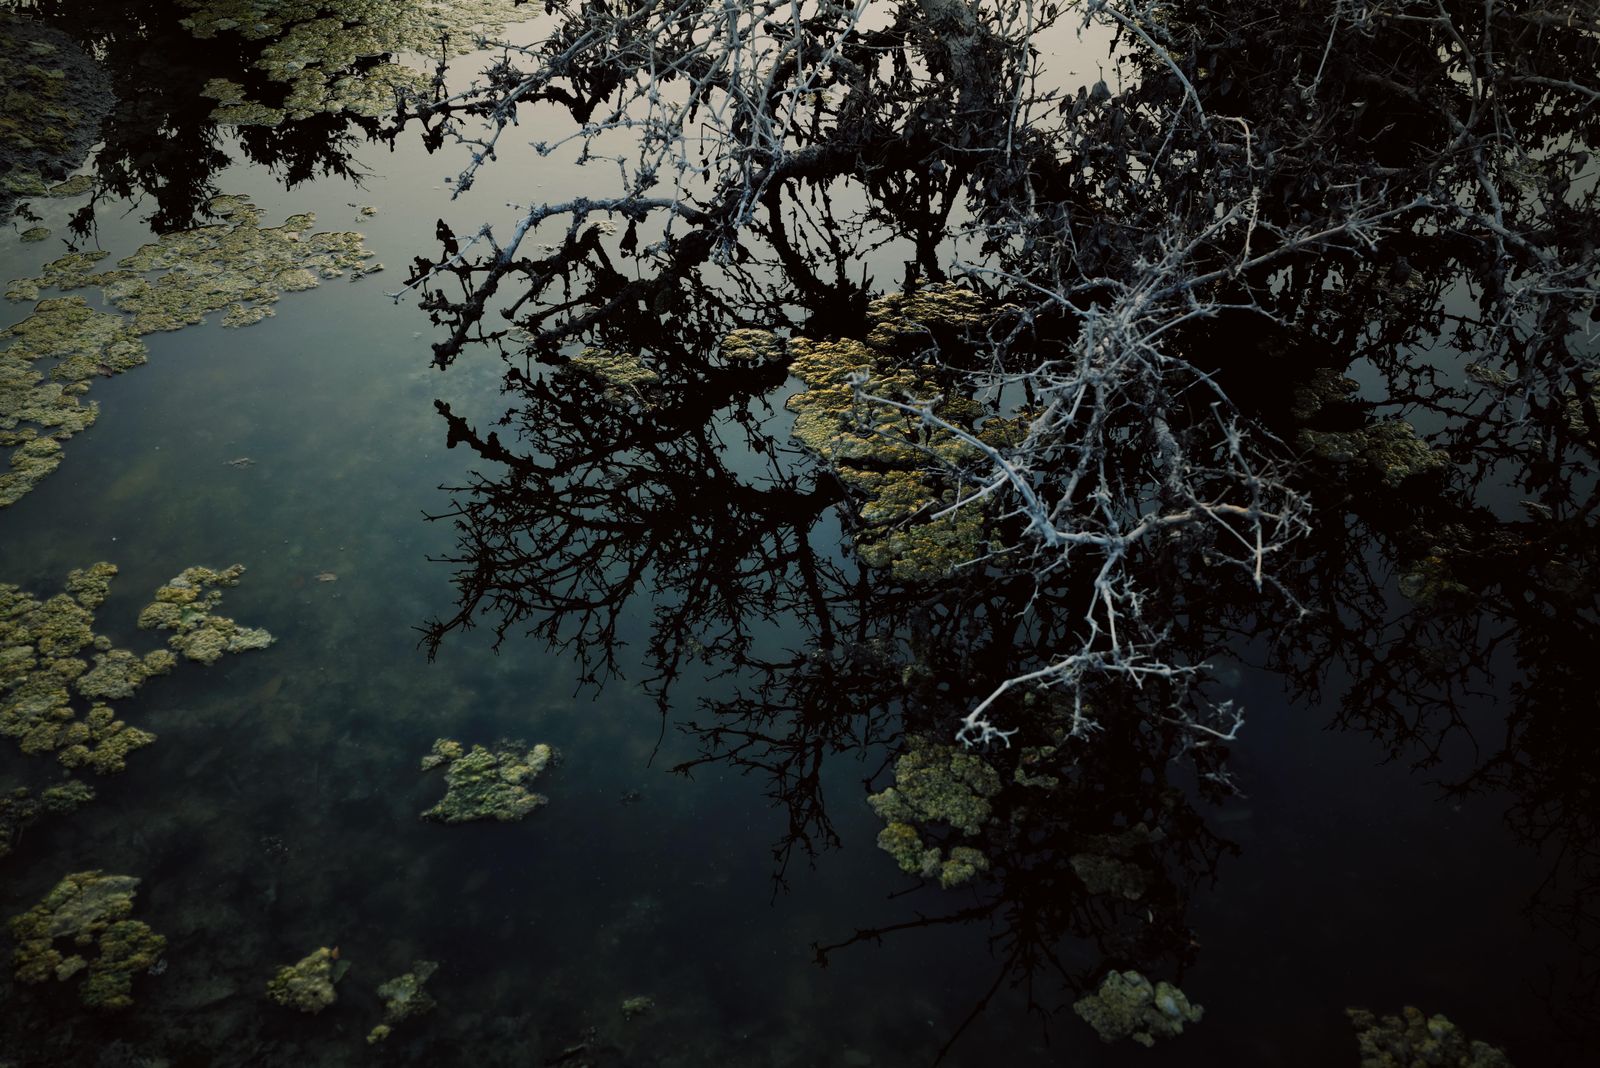 © Aziz Motawa - Image from the Intertidal photography project